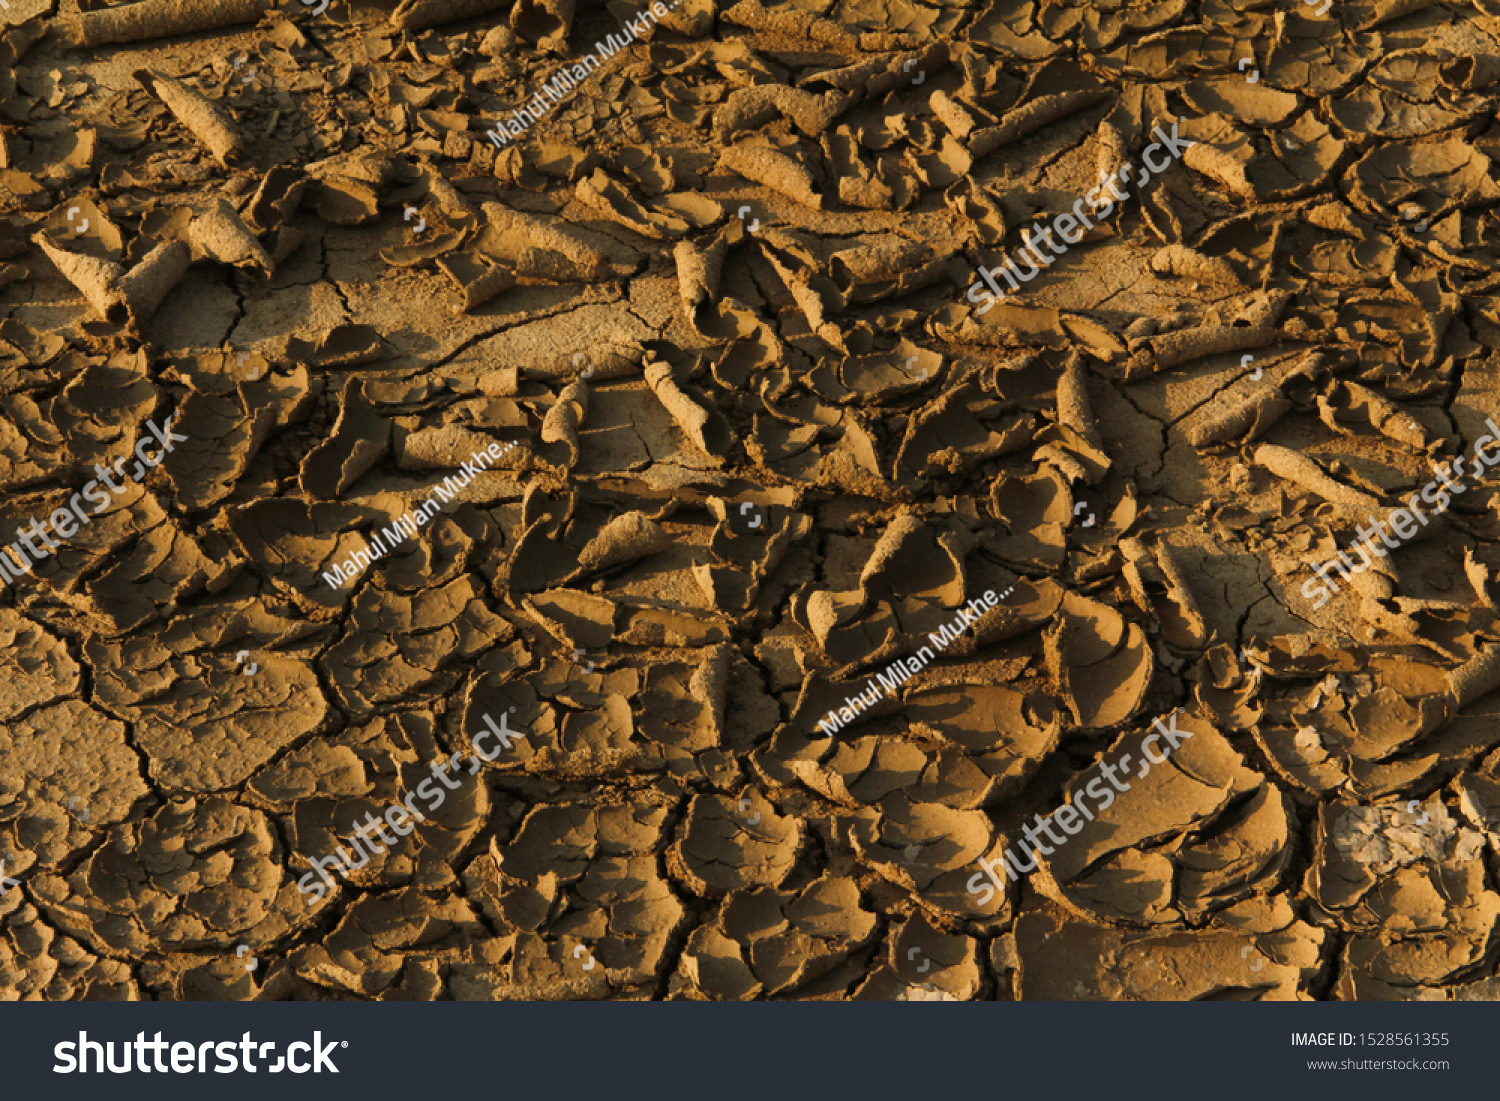 Cracked surface. Cracked dirt stock image. #1528561355